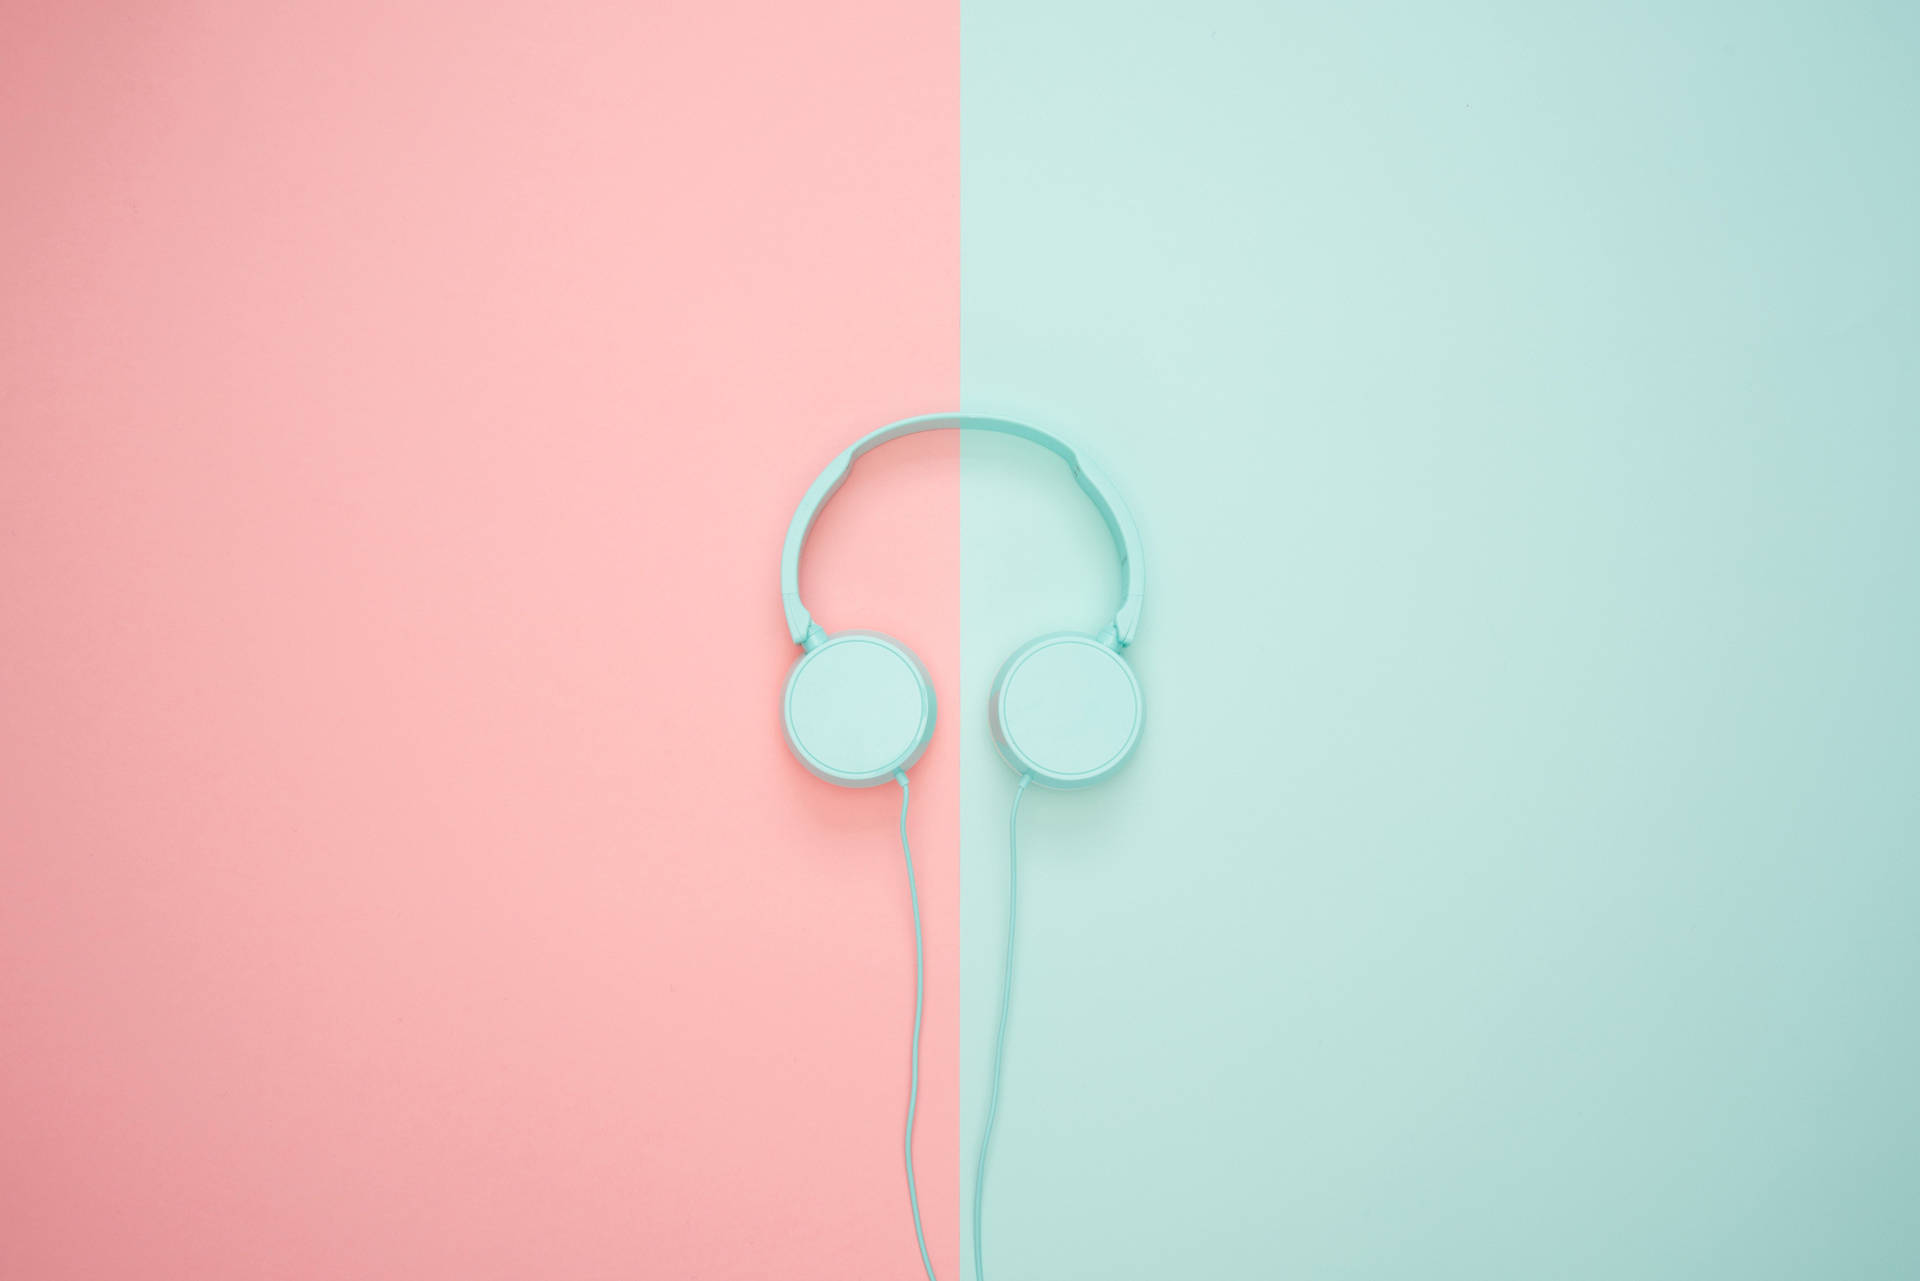 Blue Headset On Pink And Blue Wallpaper